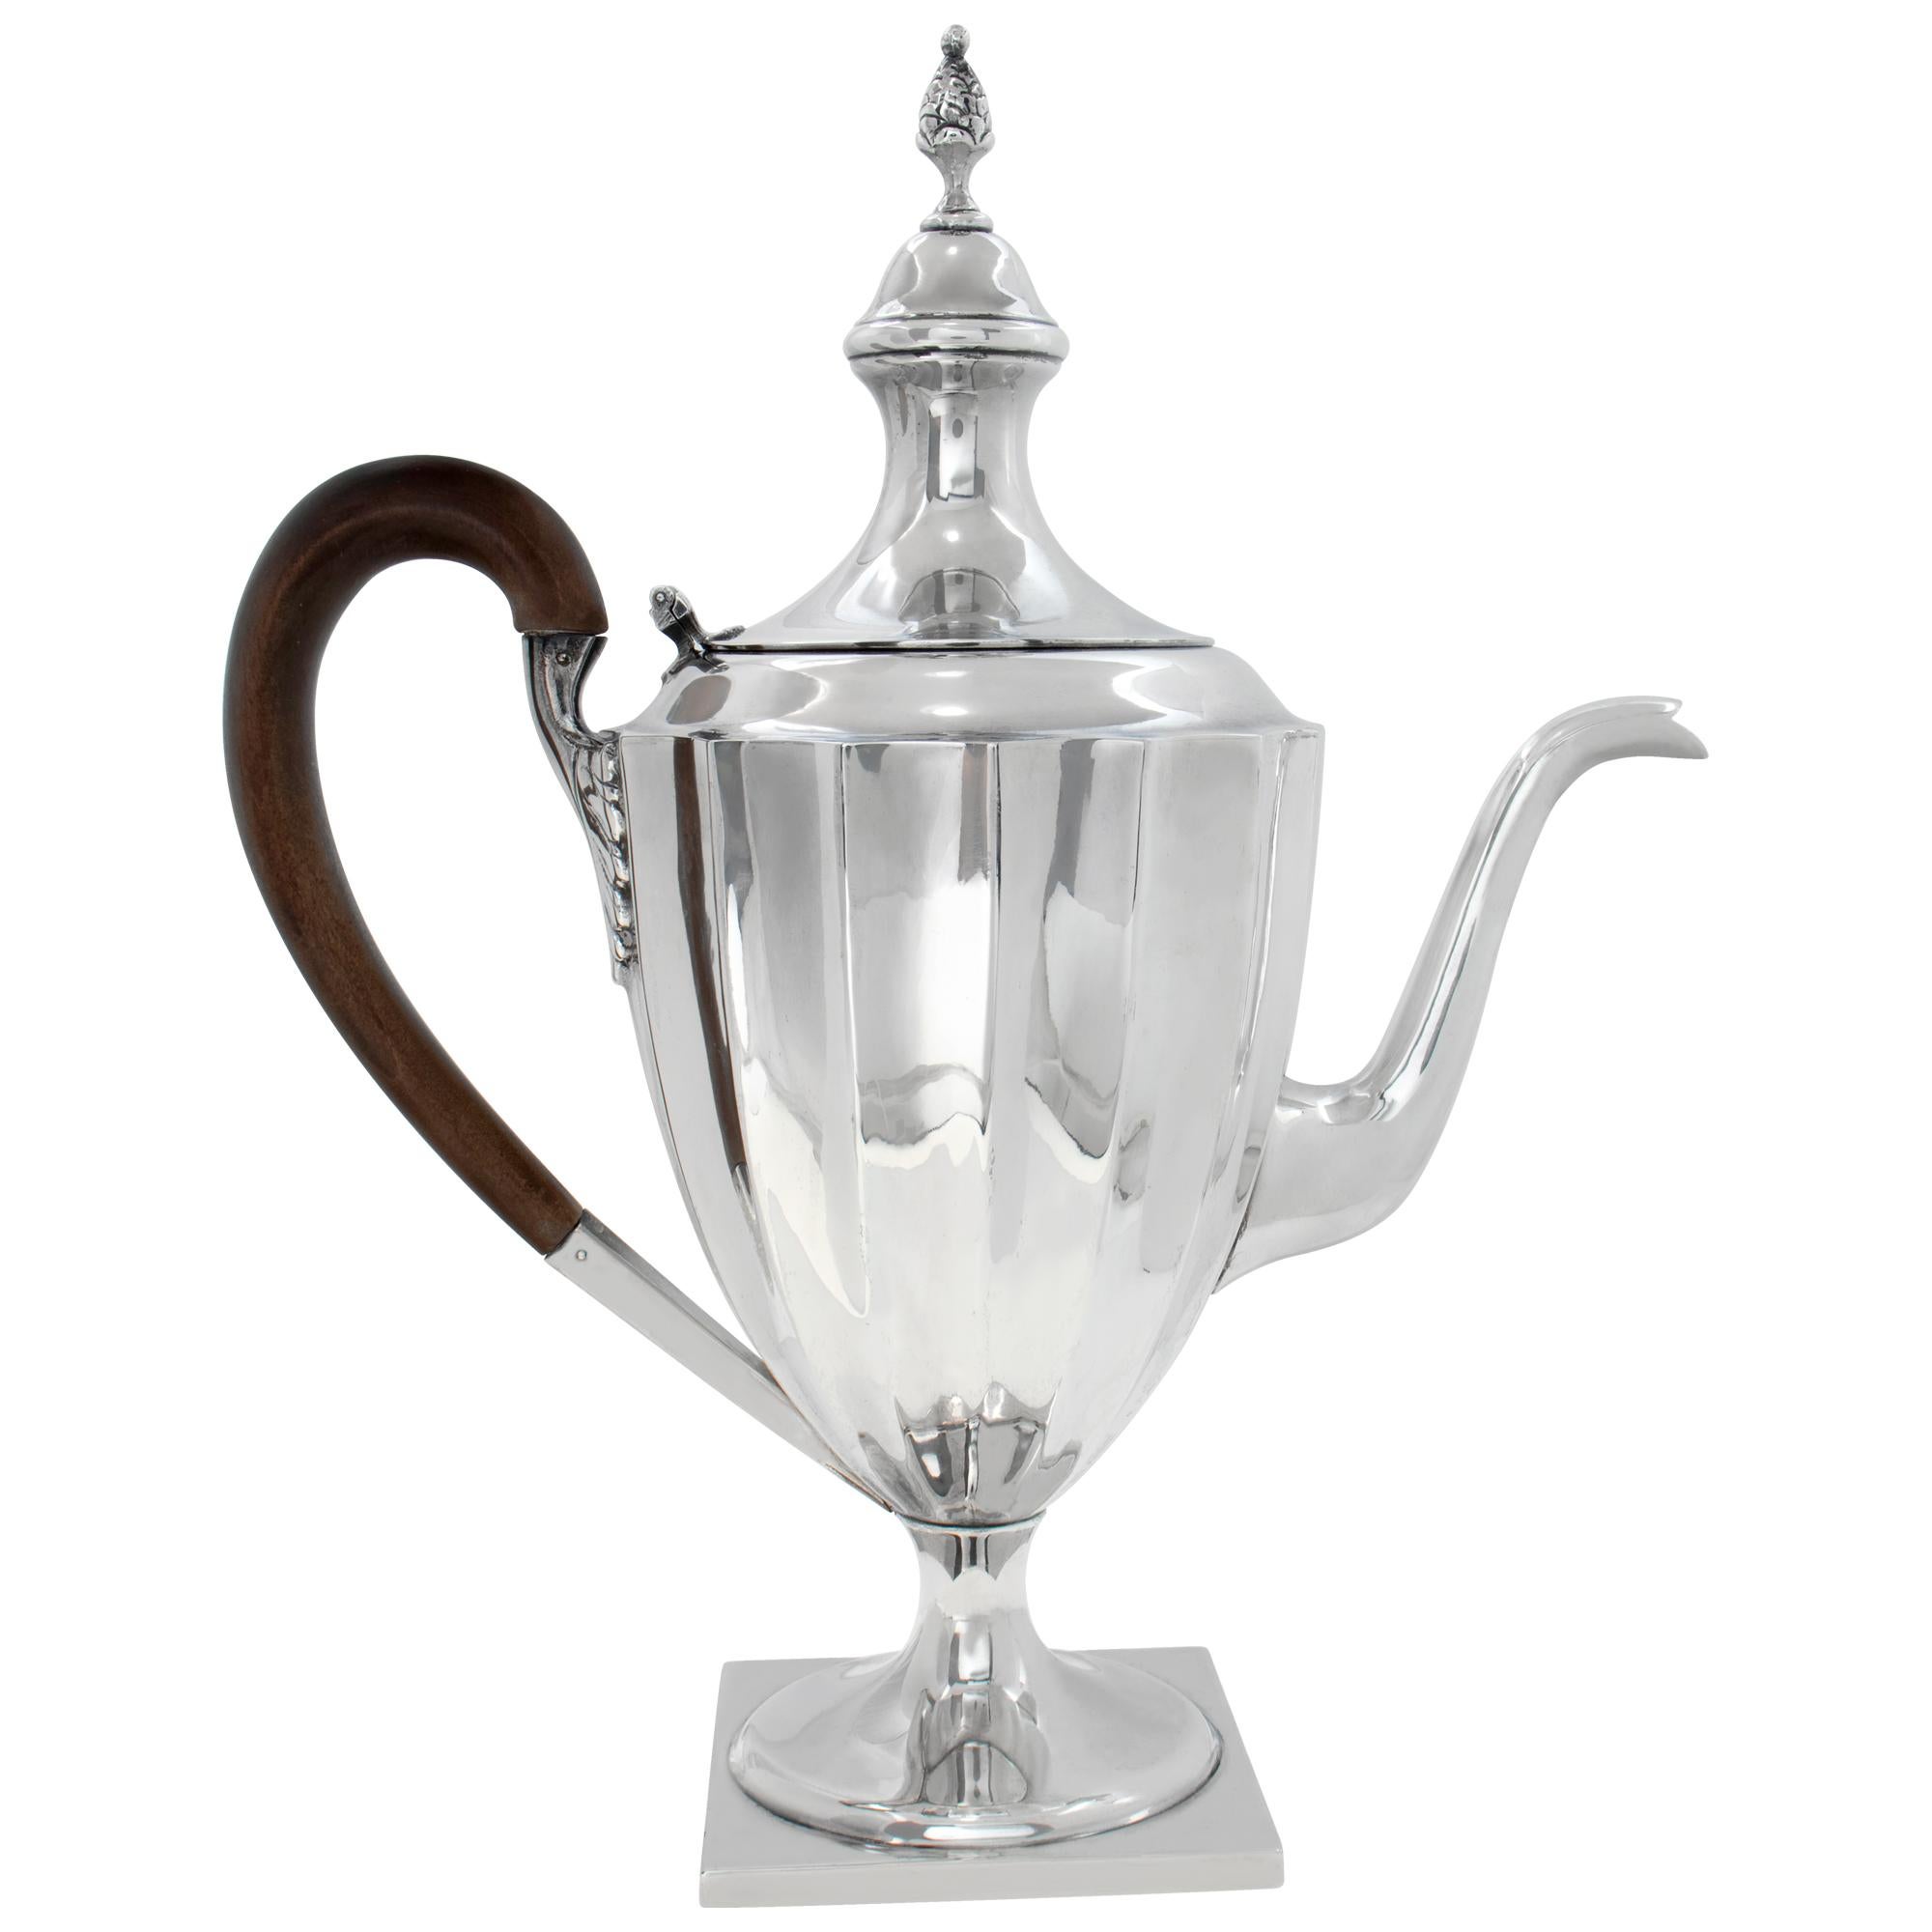 LUCO heavy Hand Wrought Sterling Silver, 4 pieces Tea/coffee set, 1960's reproduction of 1792 English Tea/Coffee set. Over 63 troy ounces of .925 handwrought sterling silver- COFFEE POT: 12 (h) x 10